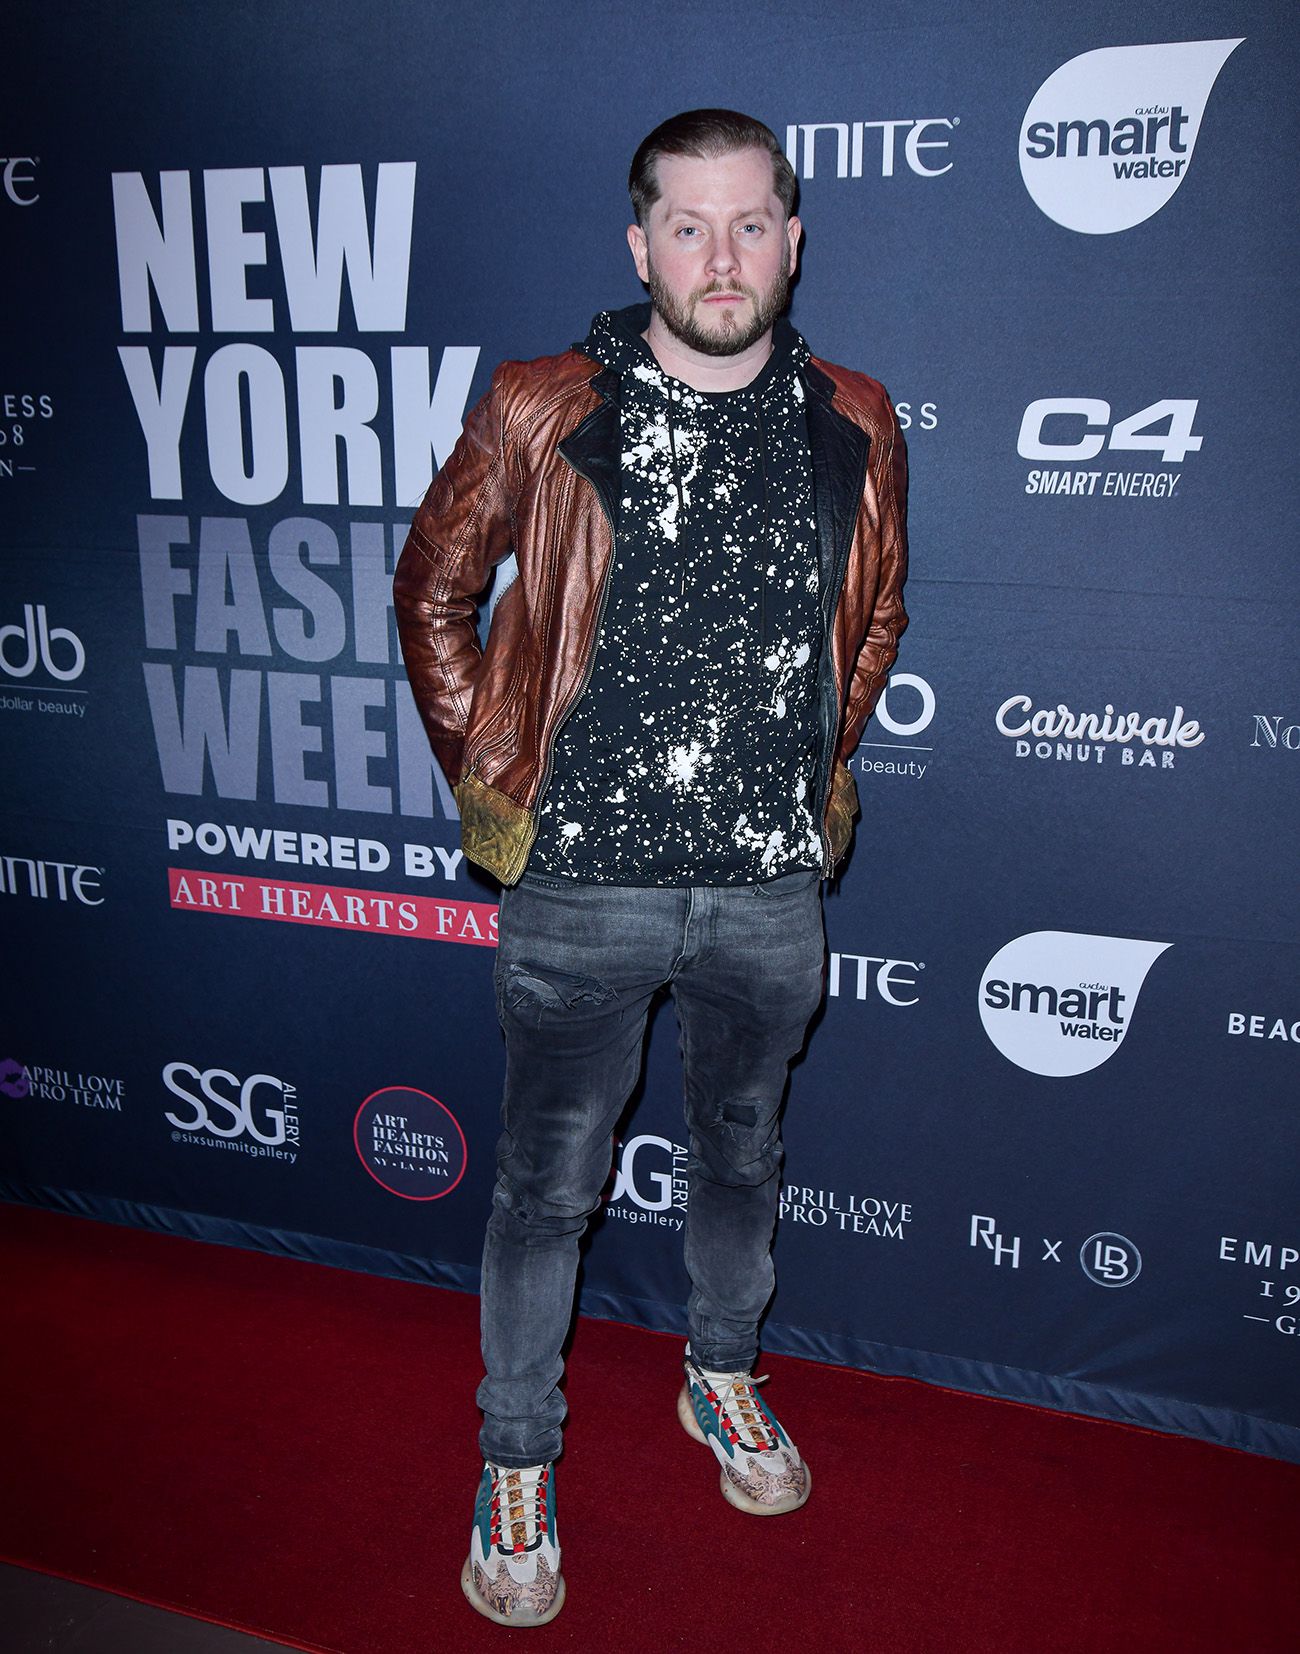 NEW YORK, NEW YORK - FEBRUARY 08: Lucky Lott arrives on the red carpet during New York Fashion Week Powered by Art Hearts Fashion at The Angel Orensanz Foundation on February 08, 2024 in New York City.  (Photo by Mark Gunter/Getty Images for Art Hearts Fashion)